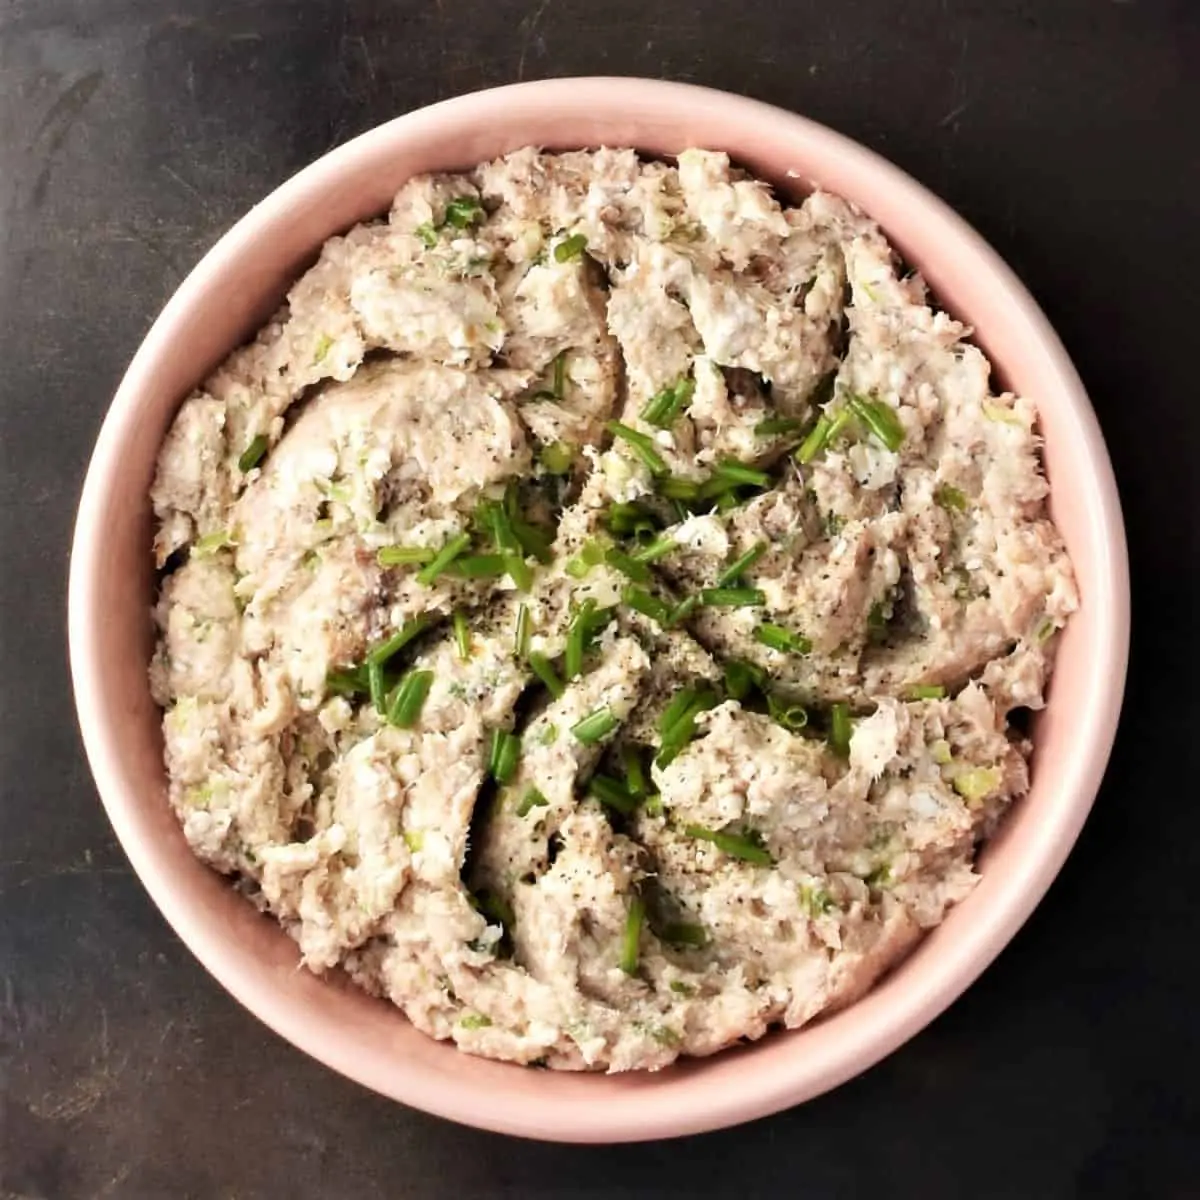 low fat smoked mackerel pate recipe - How many calories are in homemade mackerel pate